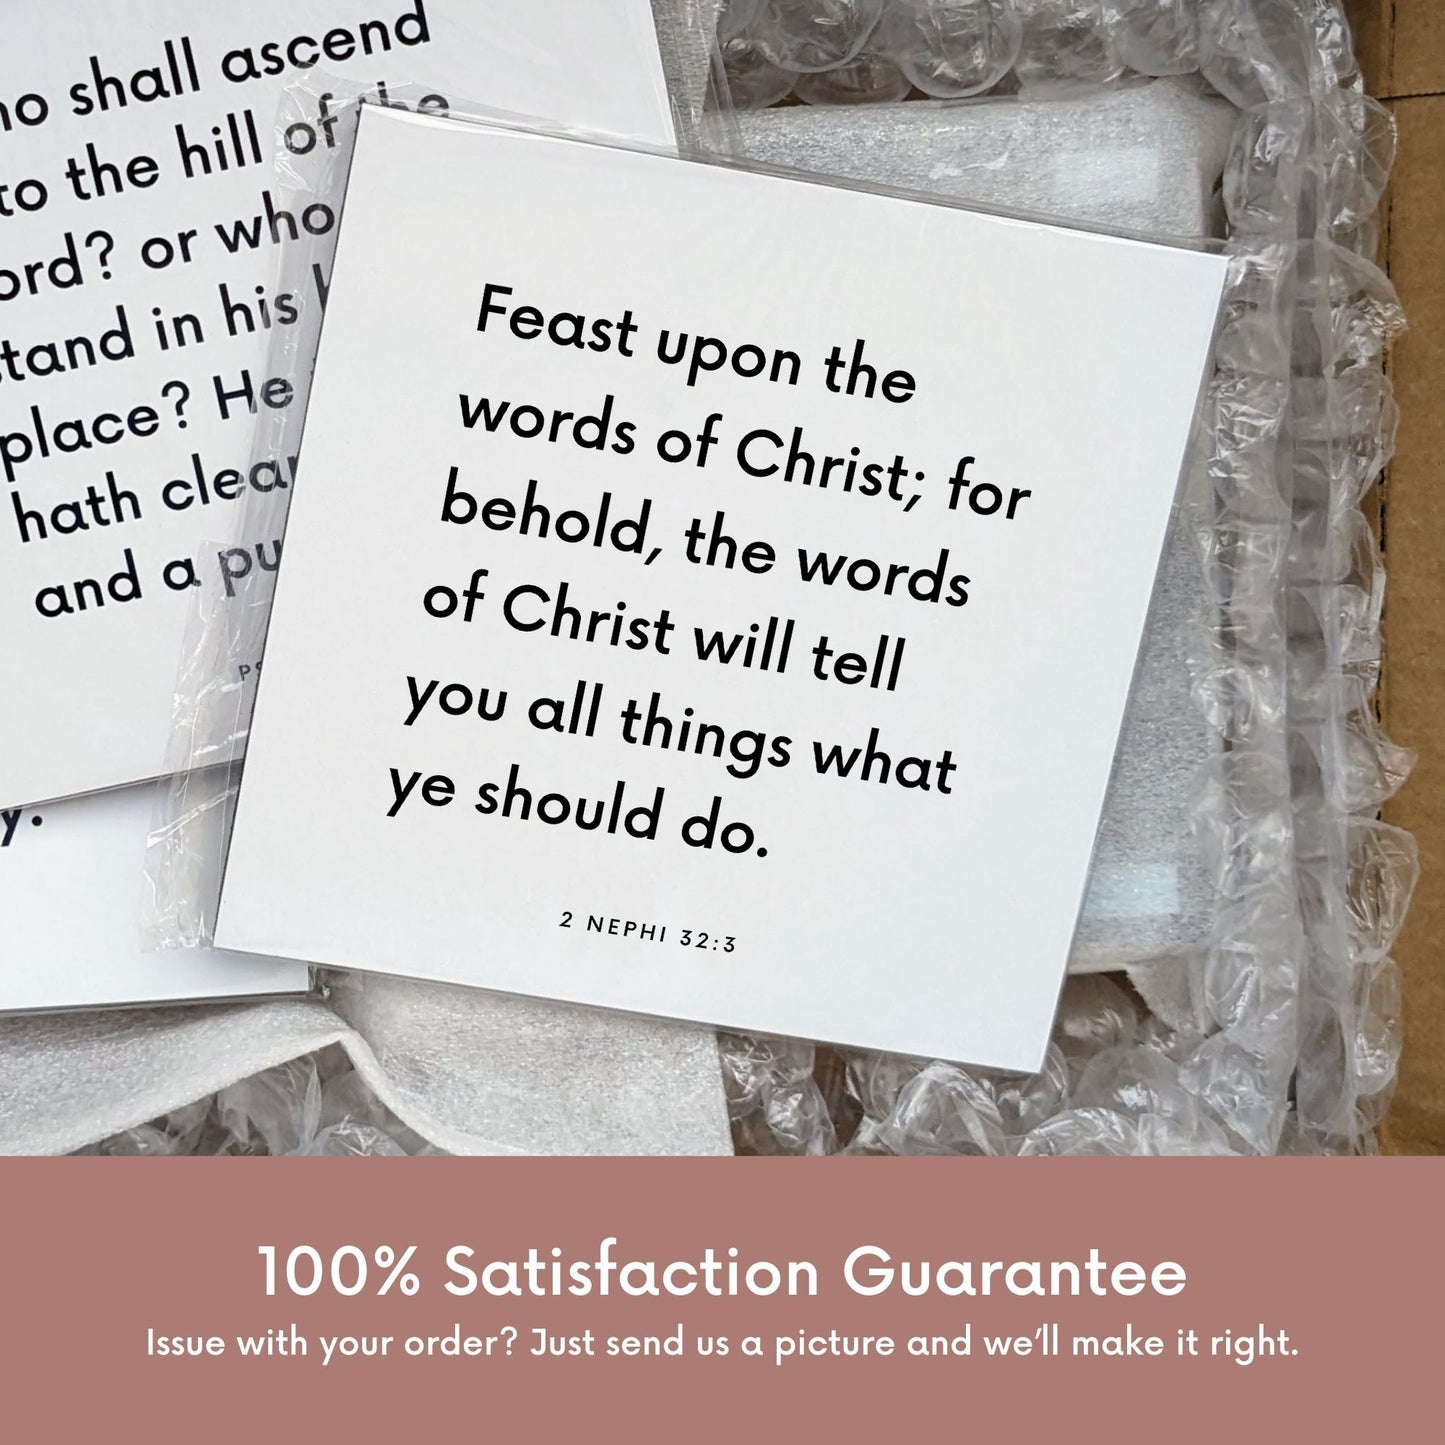 Shipping materials for scripture tile of 2 Nephi 32:3 - "Feast upon the words of Christ"